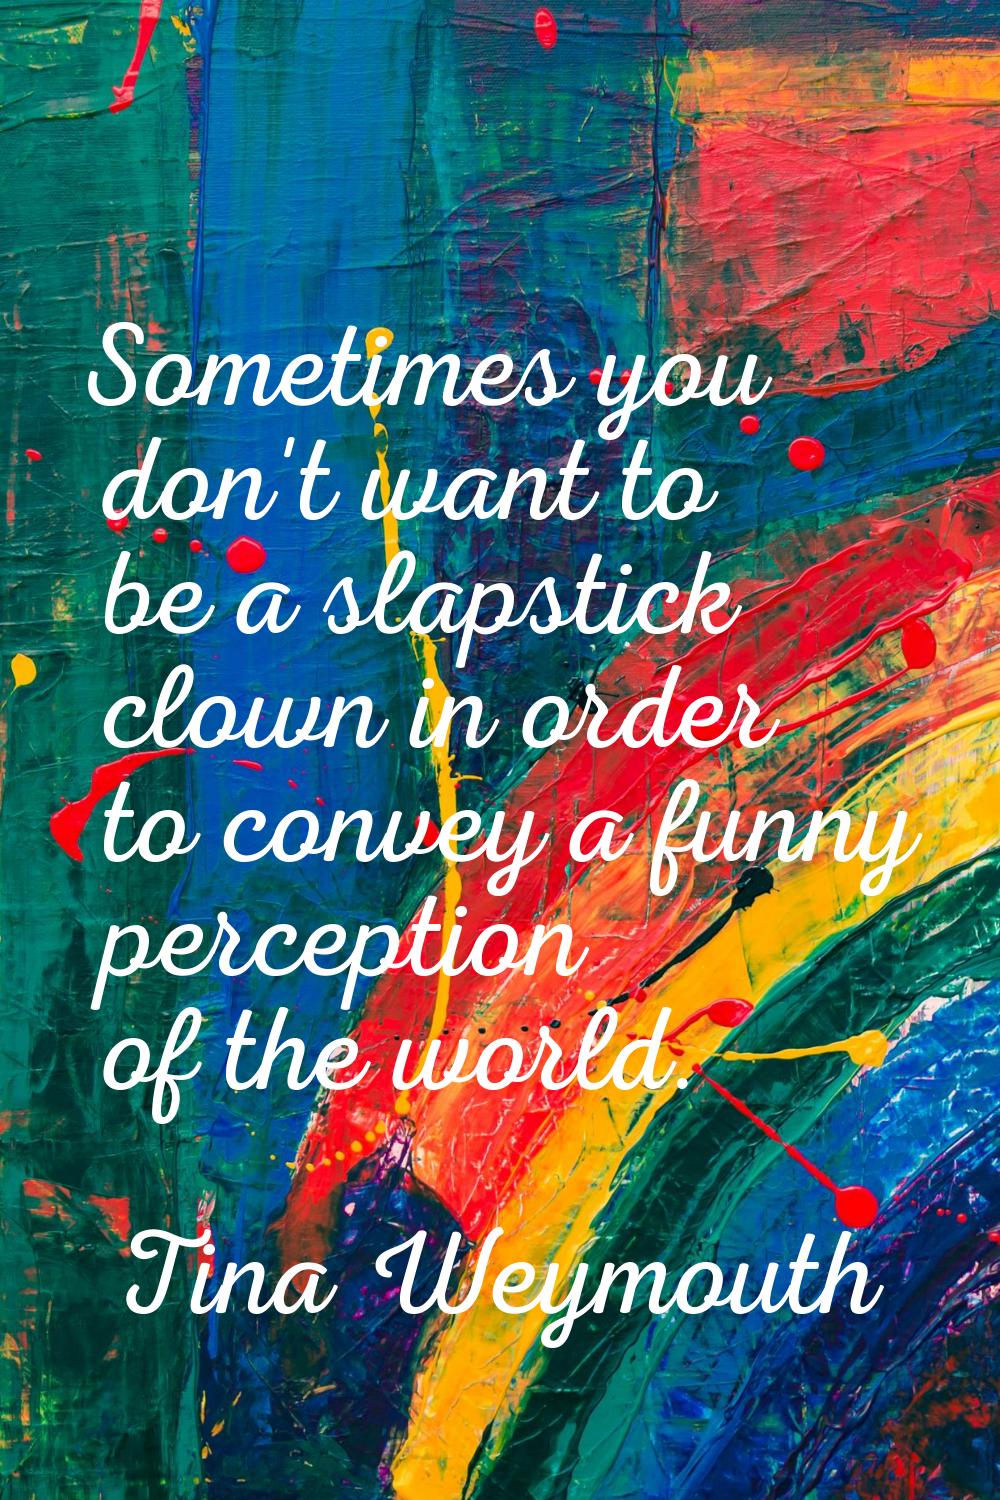 Sometimes you don't want to be a slapstick clown in order to convey a funny perception of the world